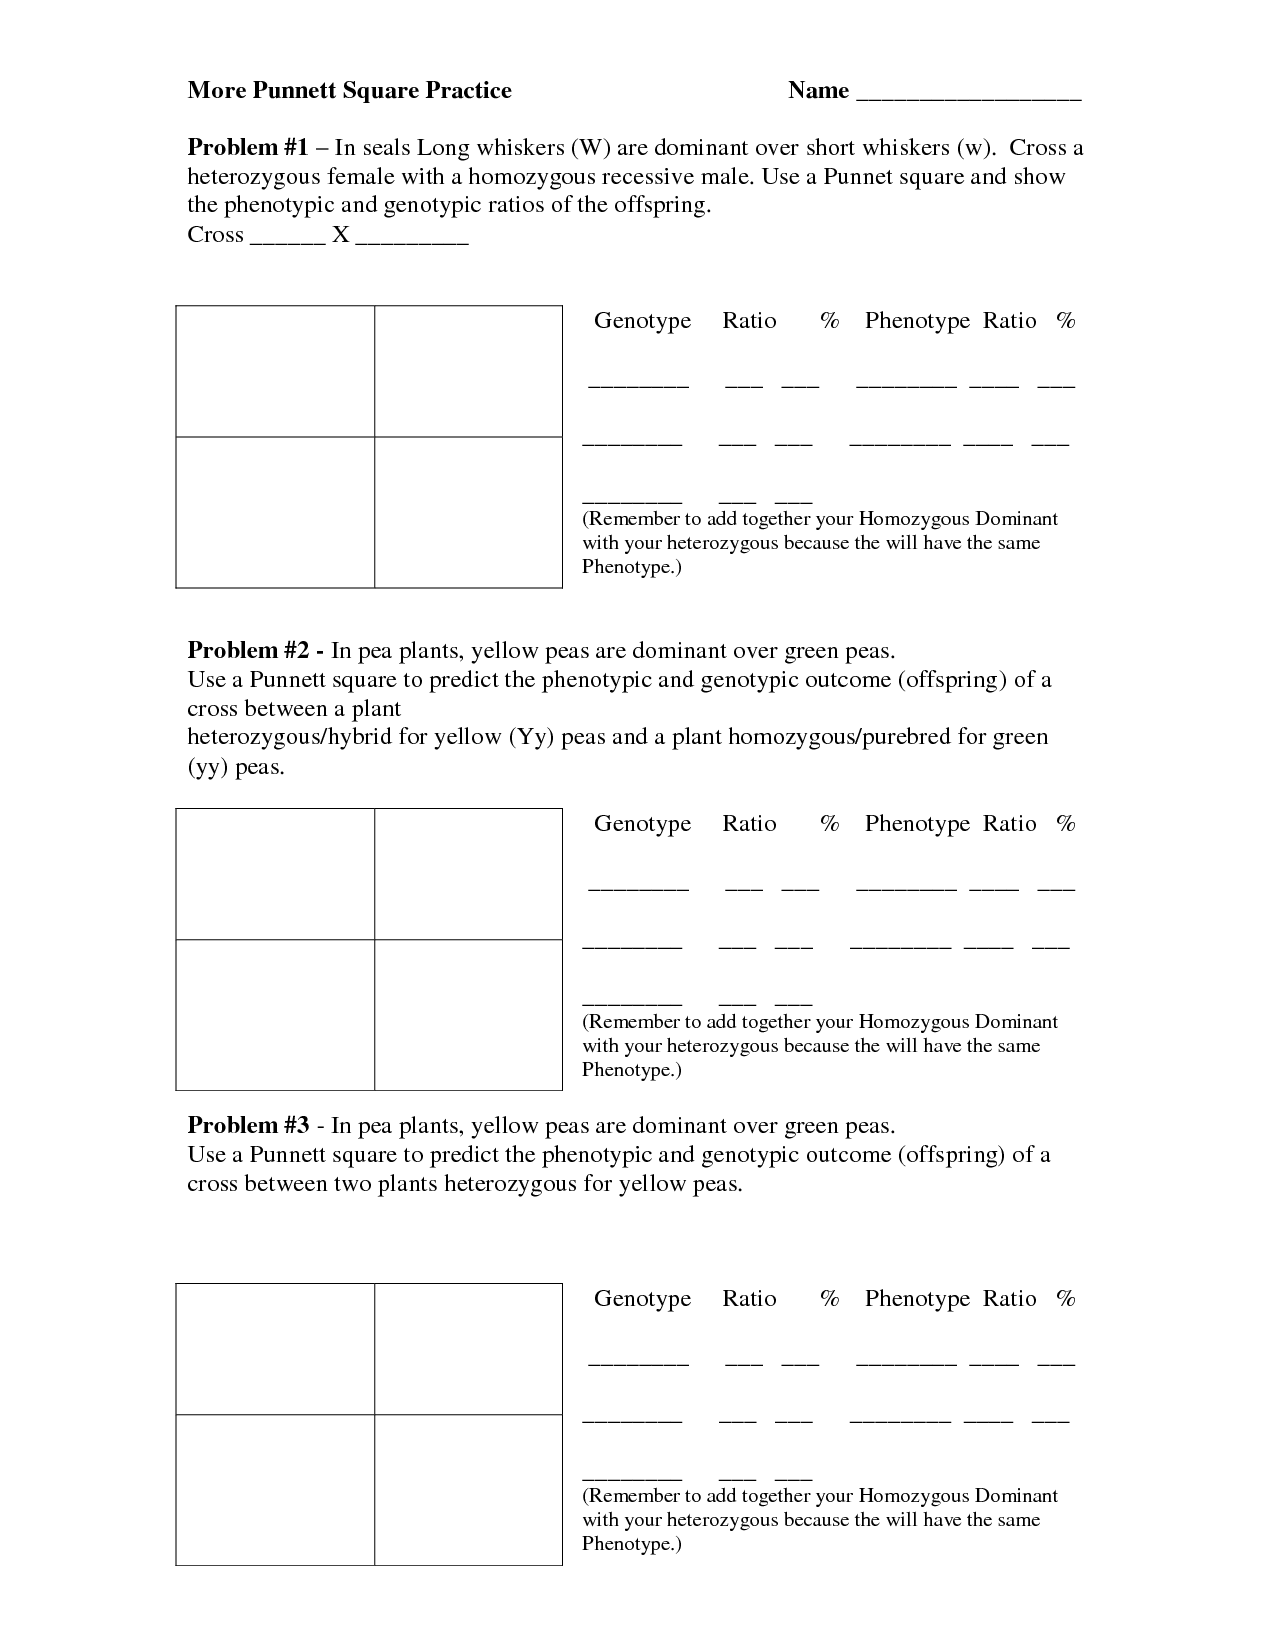 16 Best Images of Blood Type Worksheet - Answer Key Codominance